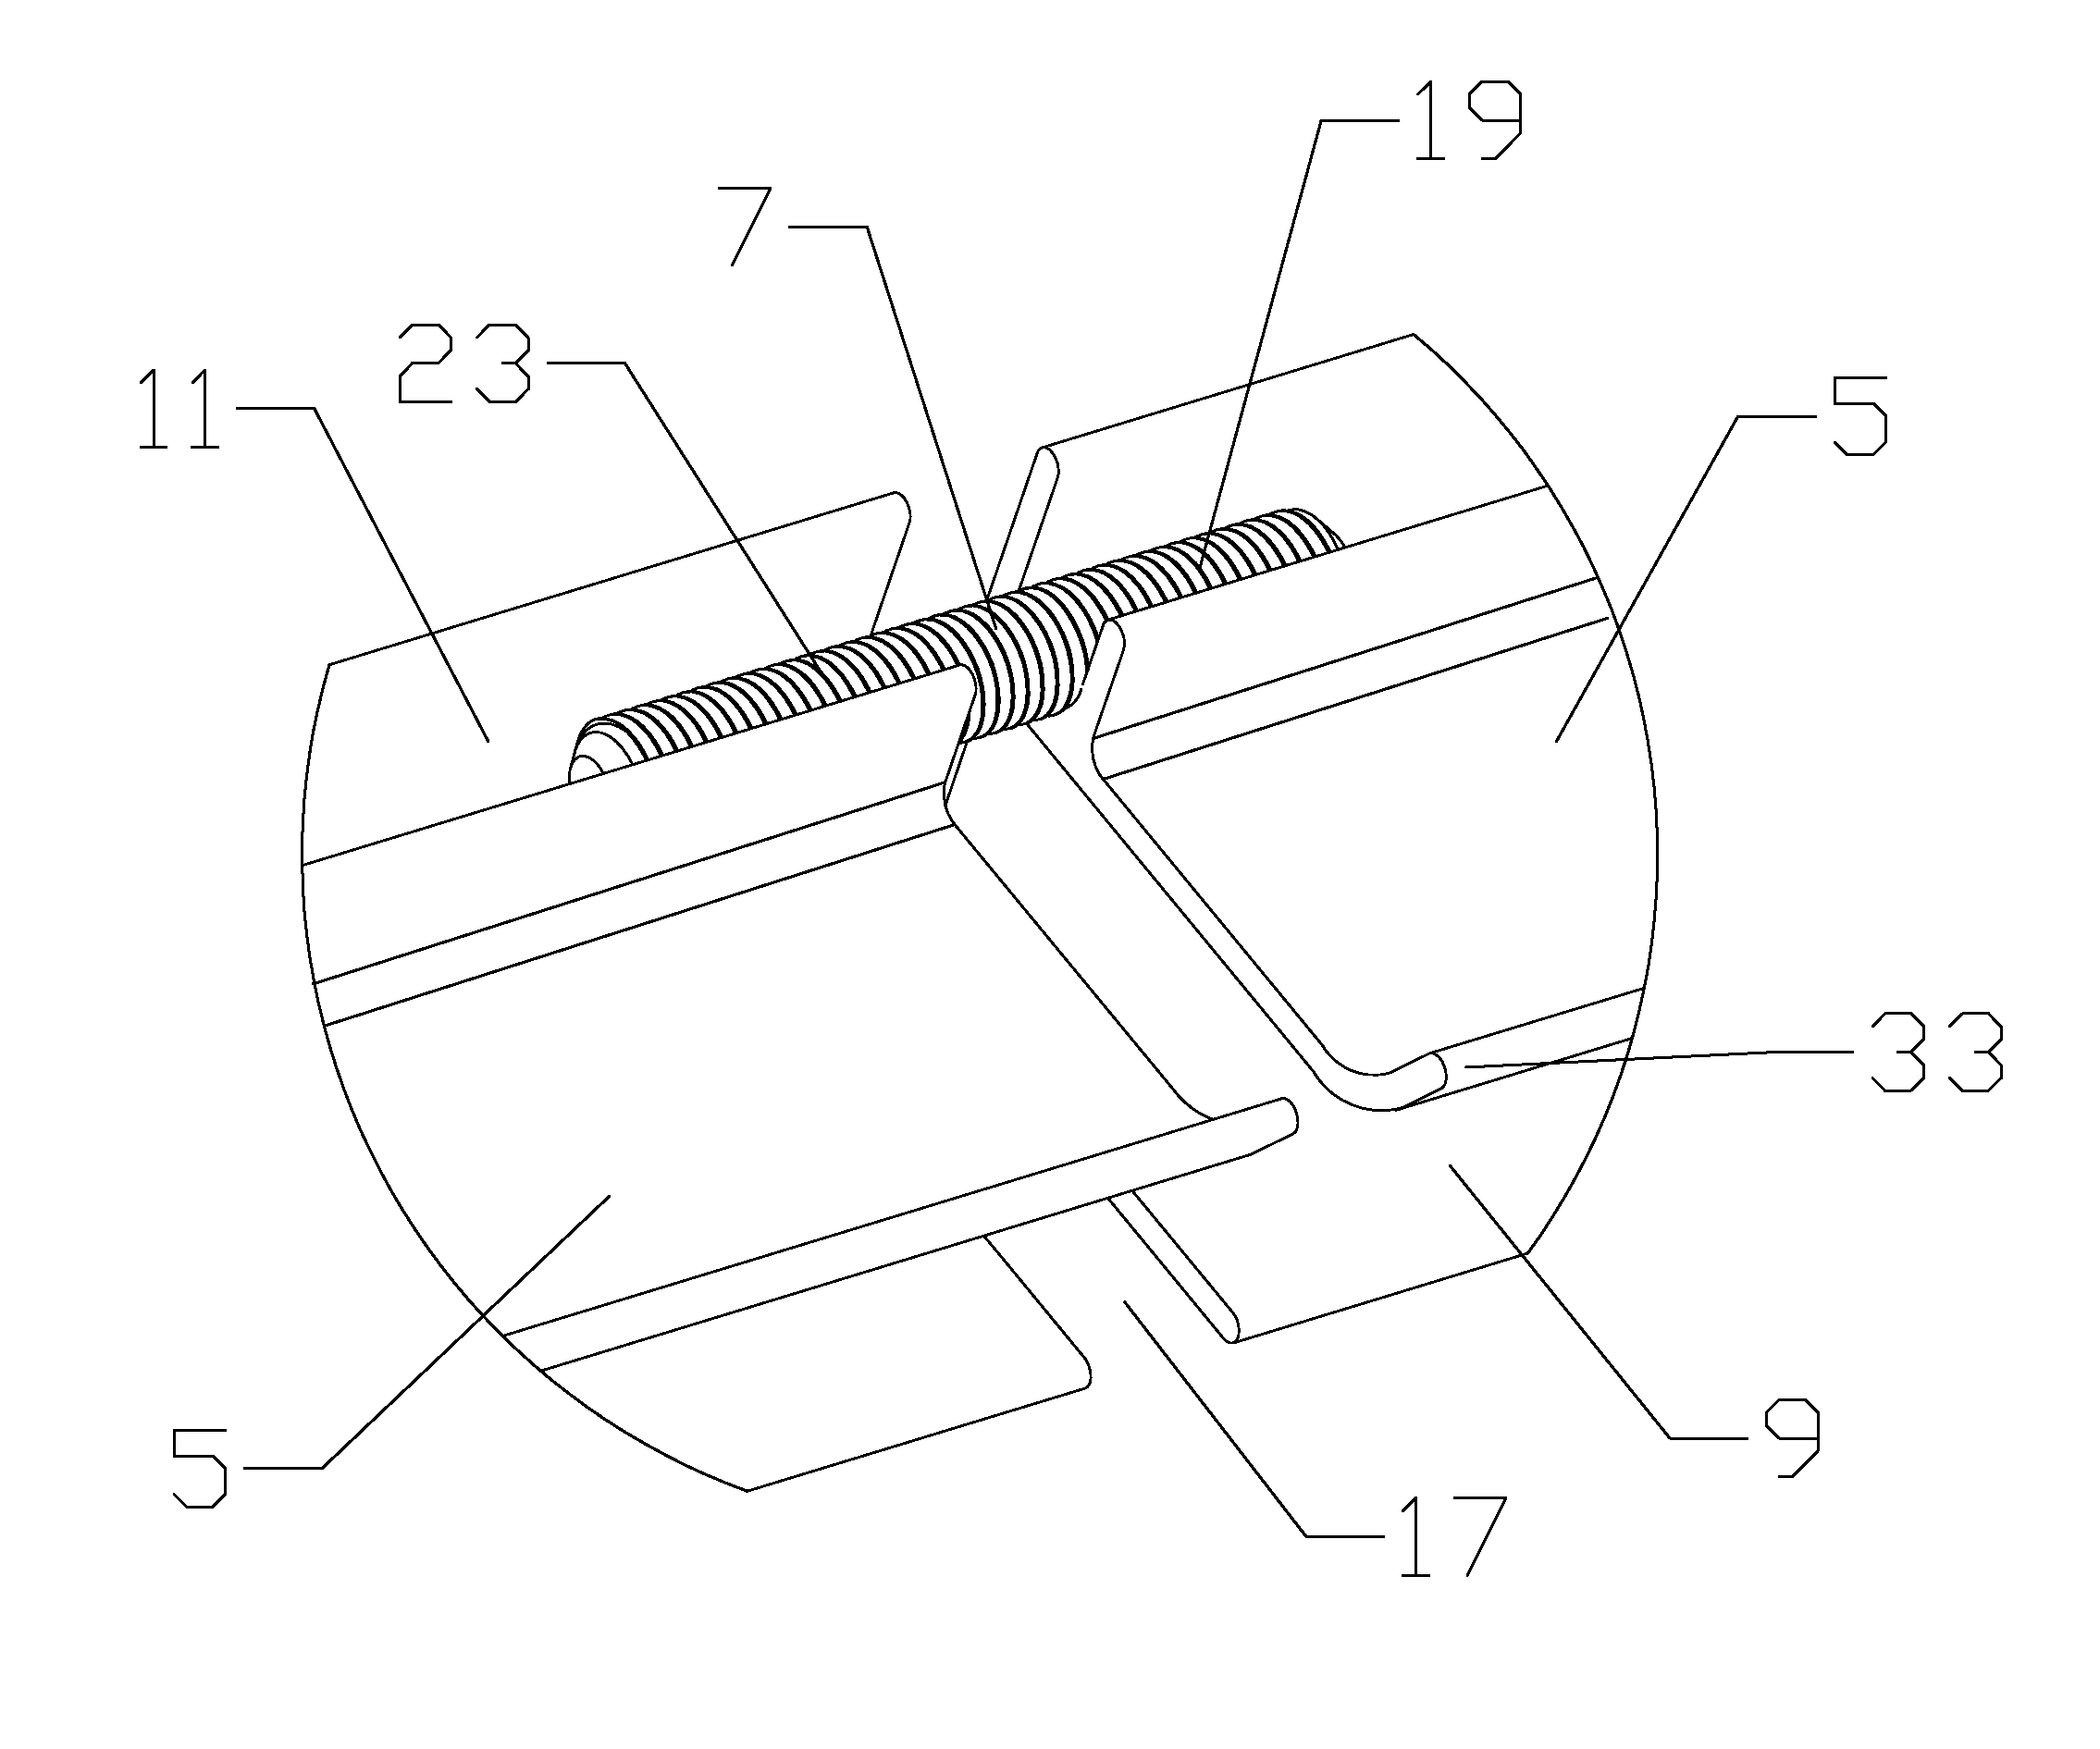 Method and apparatus for radome and reflector dish interconnection